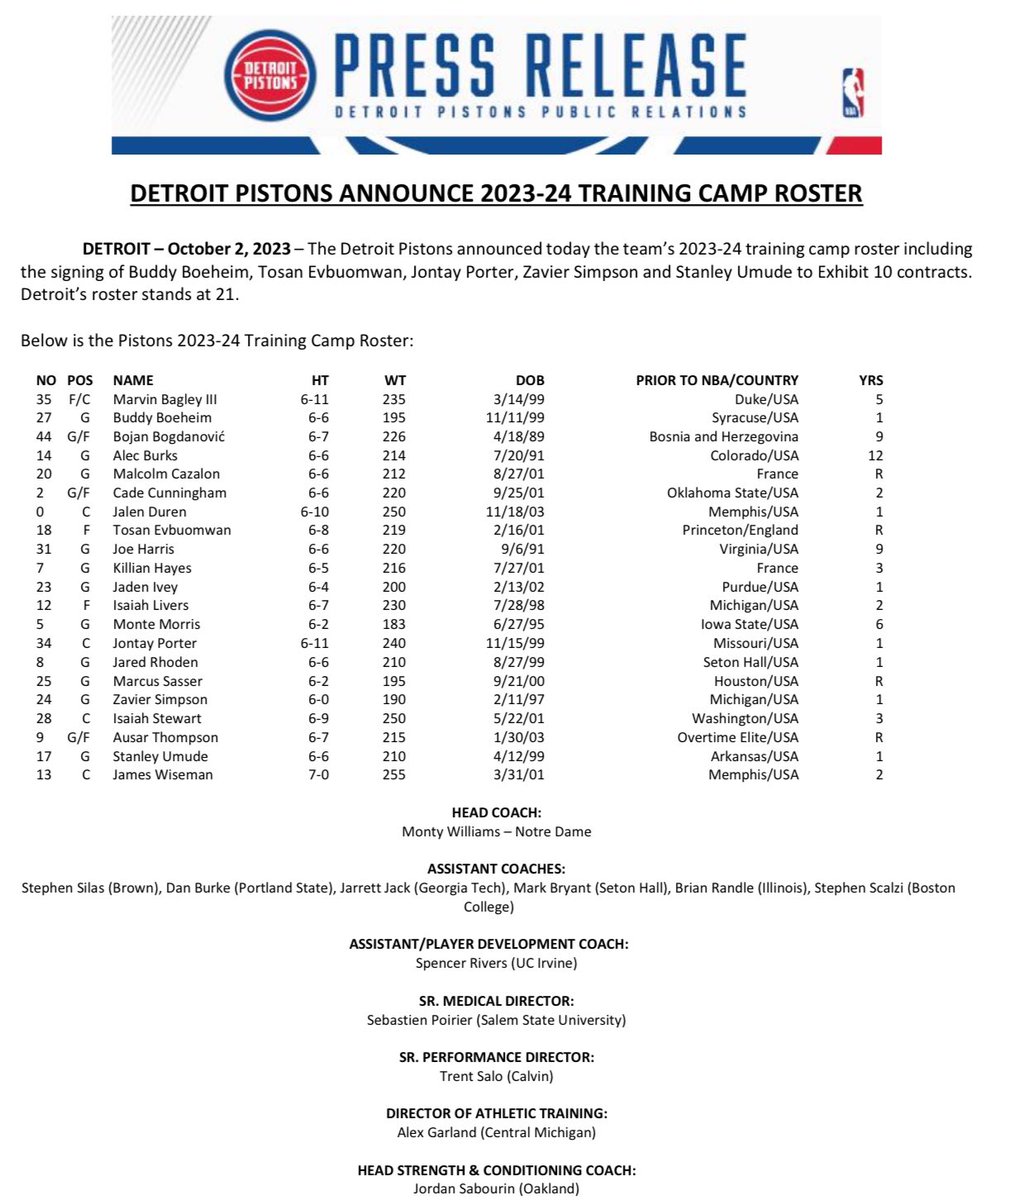 The @DetroitPistons announced today the team’s 2023-24 training camp roster including the signing of Buddy Boeheim, Tosan Evbuomwan, Jontay Porter, Zavier Simpson and Stanley Umude to Exhibit 10 contracts.